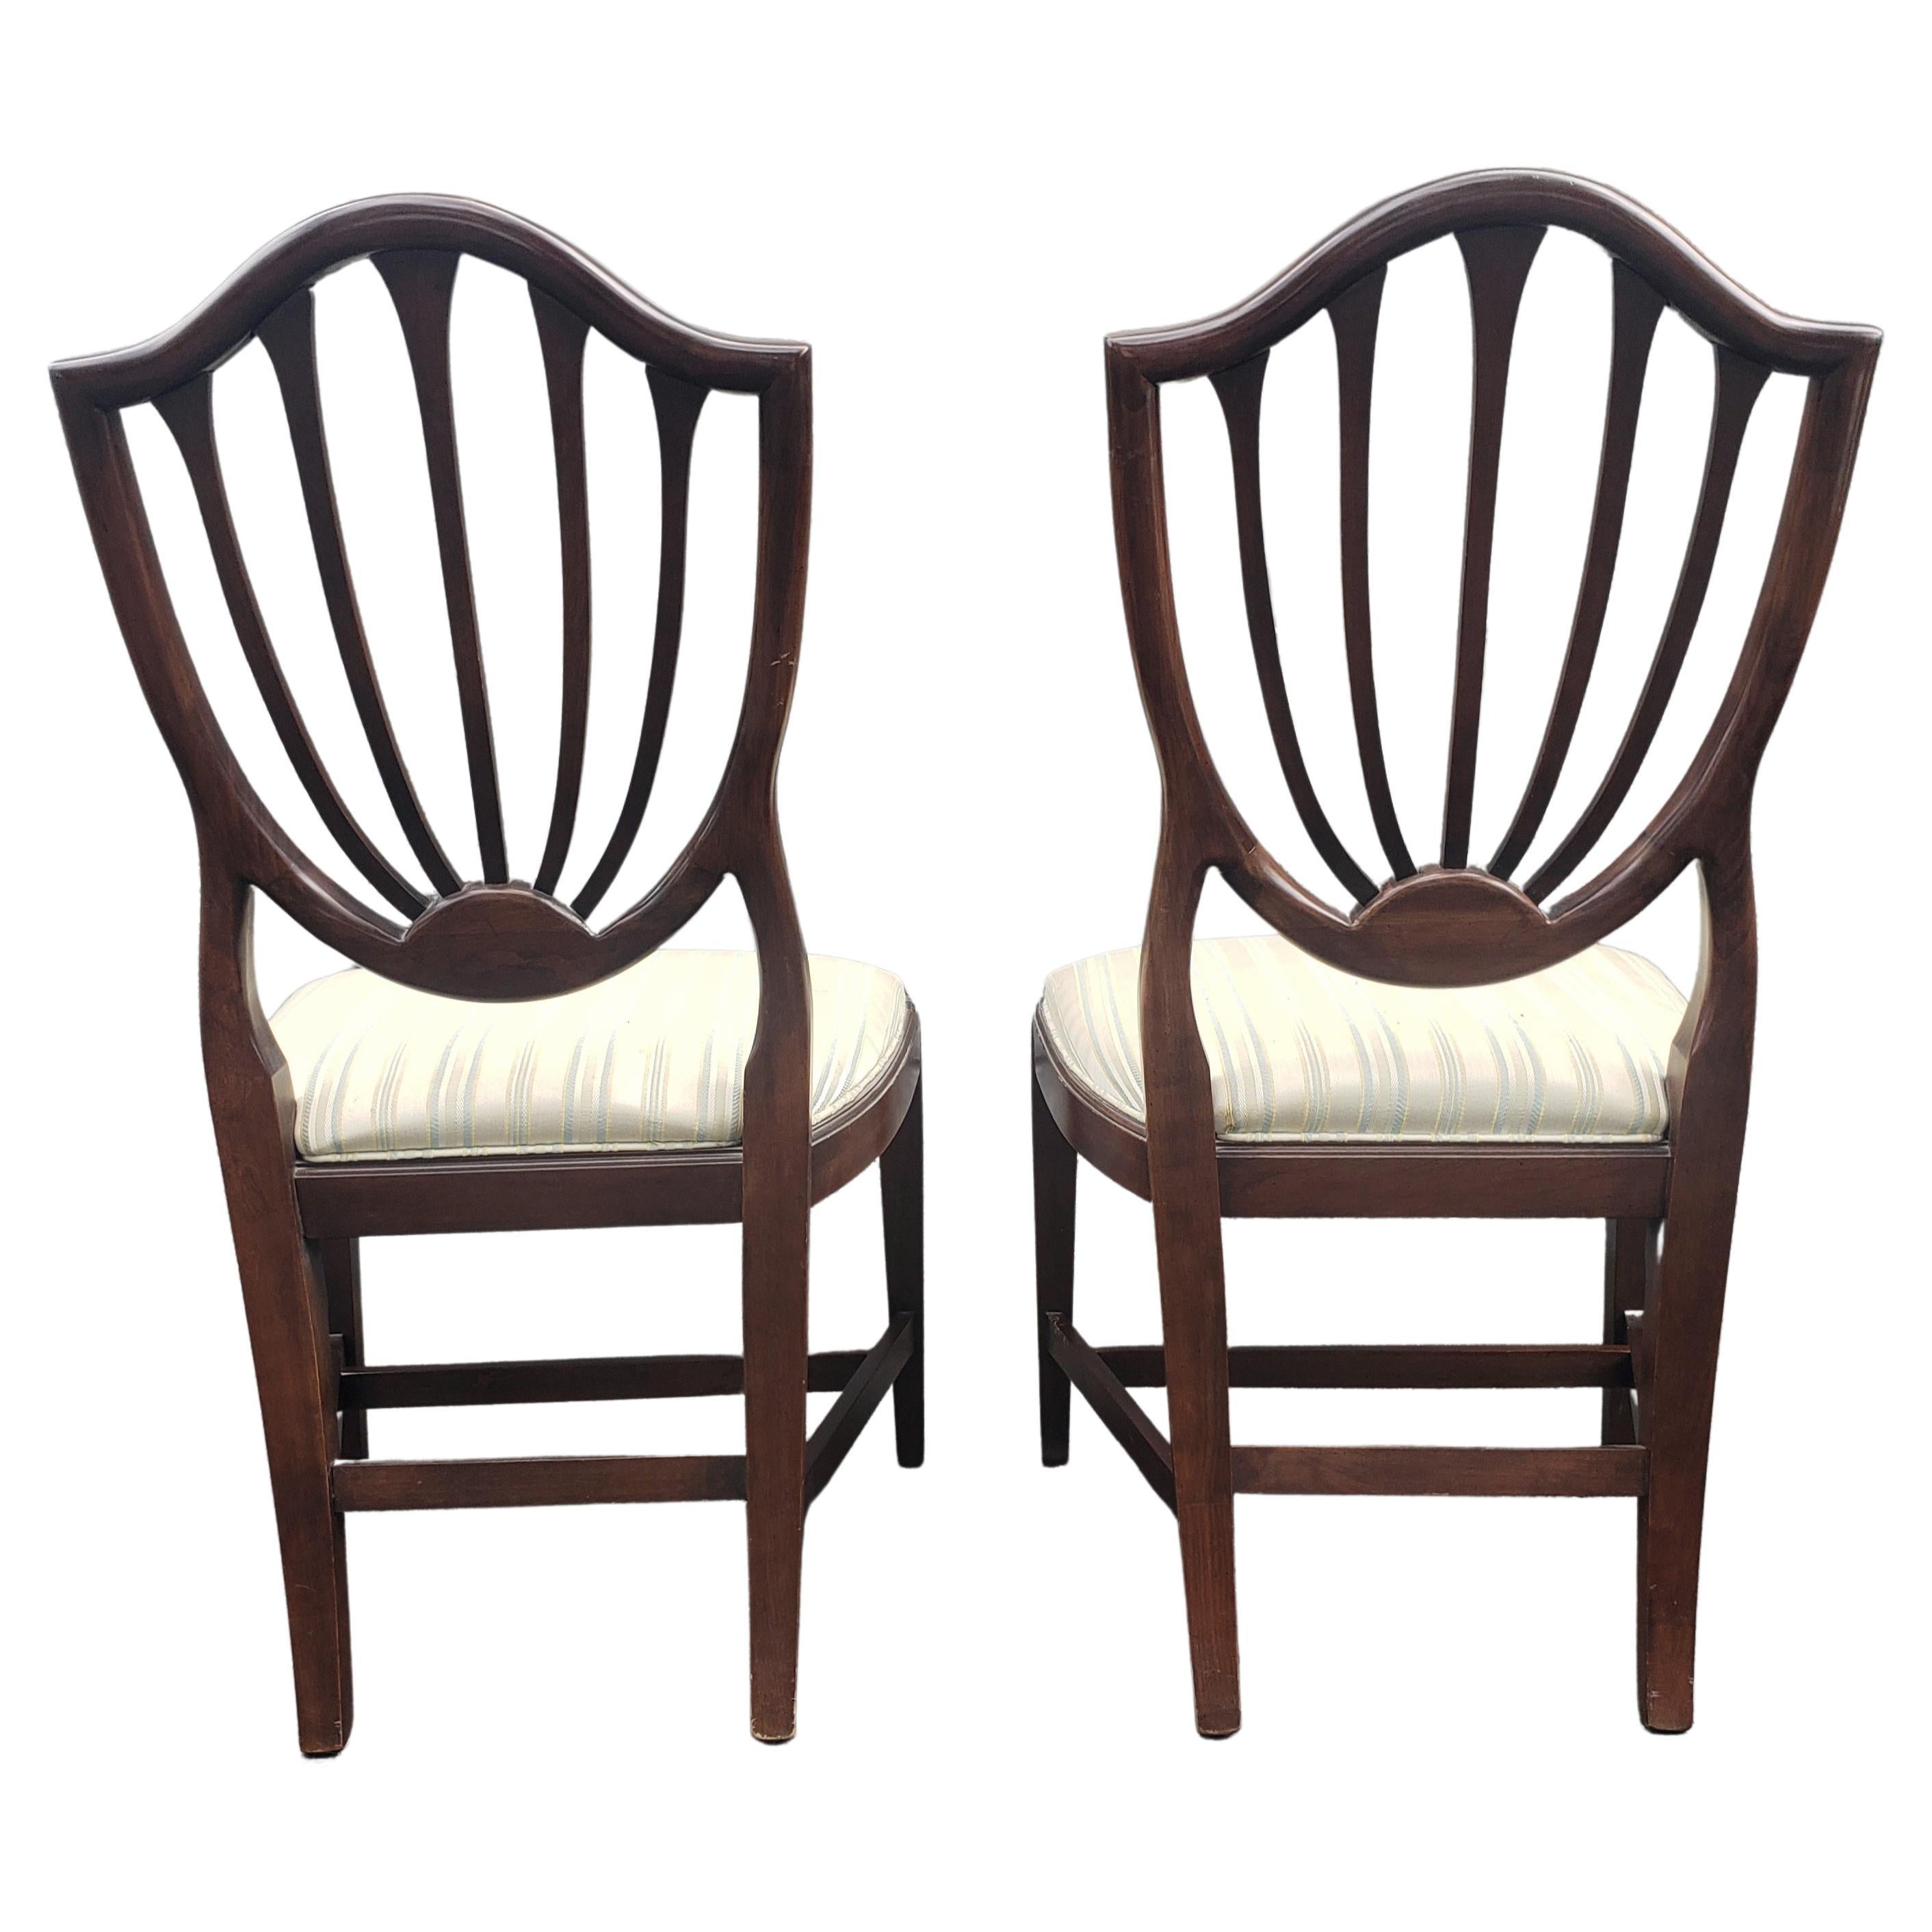 An absolutely gorgeous set of 6 midcentury Ethan Allen Georgian Court Mahogany and Upholstered Shield back dining chairs in great vintage condition. Refinished and reupholstered not long ago. 4 side chairs and 2 captain chairs.
Measures 21